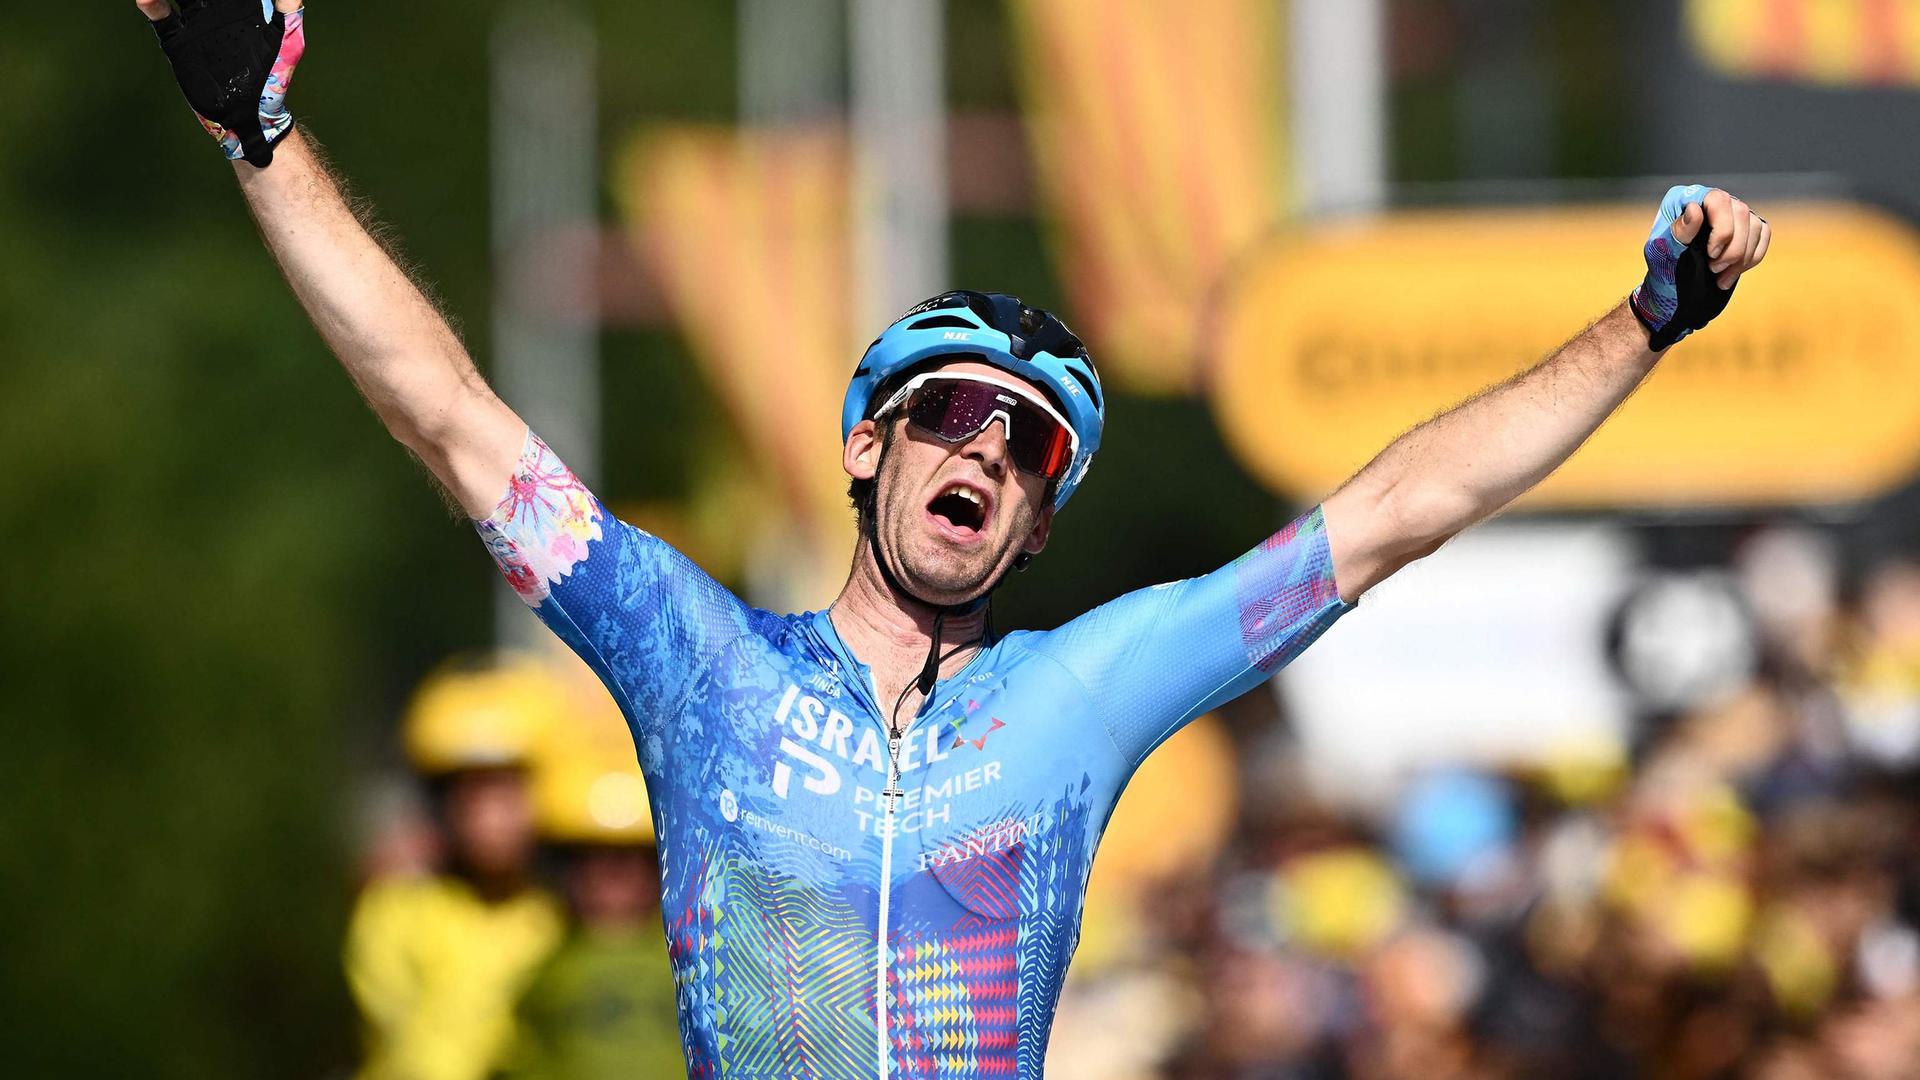 TOPSHOT - Israel-Premier Tech team's Canadian rider Hugo Houle celebrates as he cycles to the finish line to win the 16th stage of the 109th edition of the Tour de France cycling race, 178,5 km between Carcassonne and Foix in southern France, on July 19, 2022. (Photo by Marco BERTORELLO / AFP)